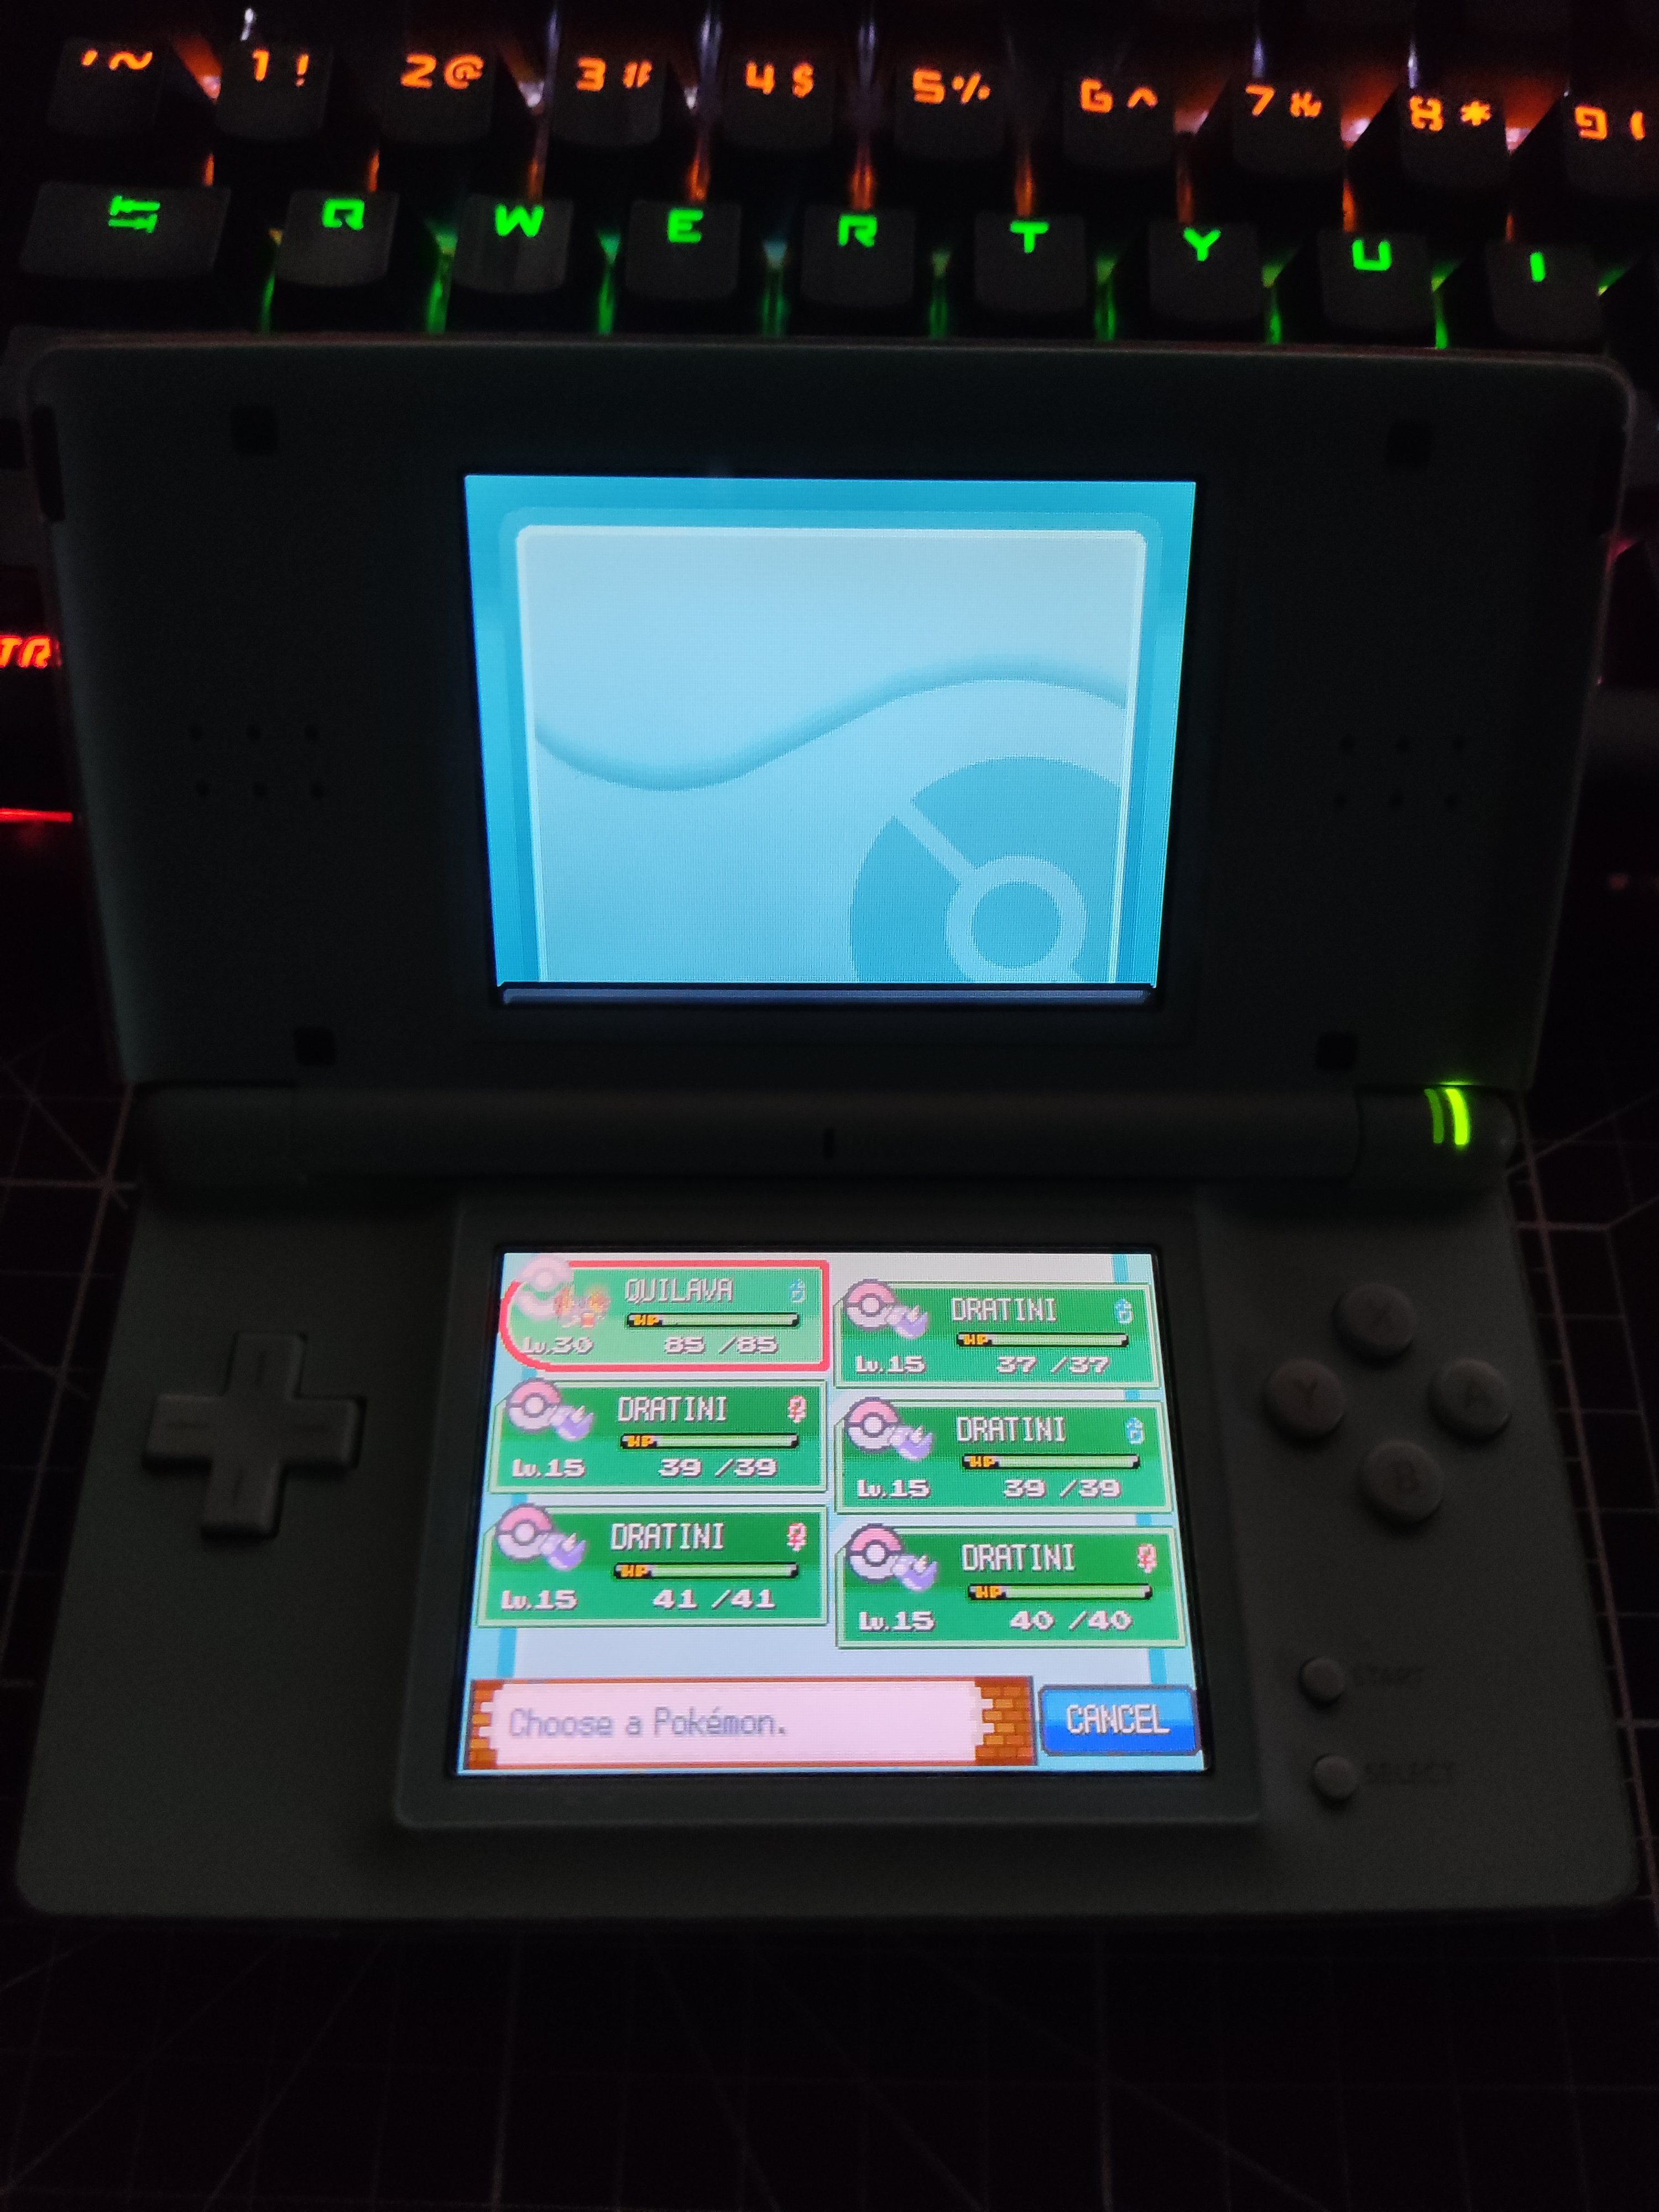 How to Play NDS ROMs Using R4 Gold Flashcard for 3DS/DSi/DS